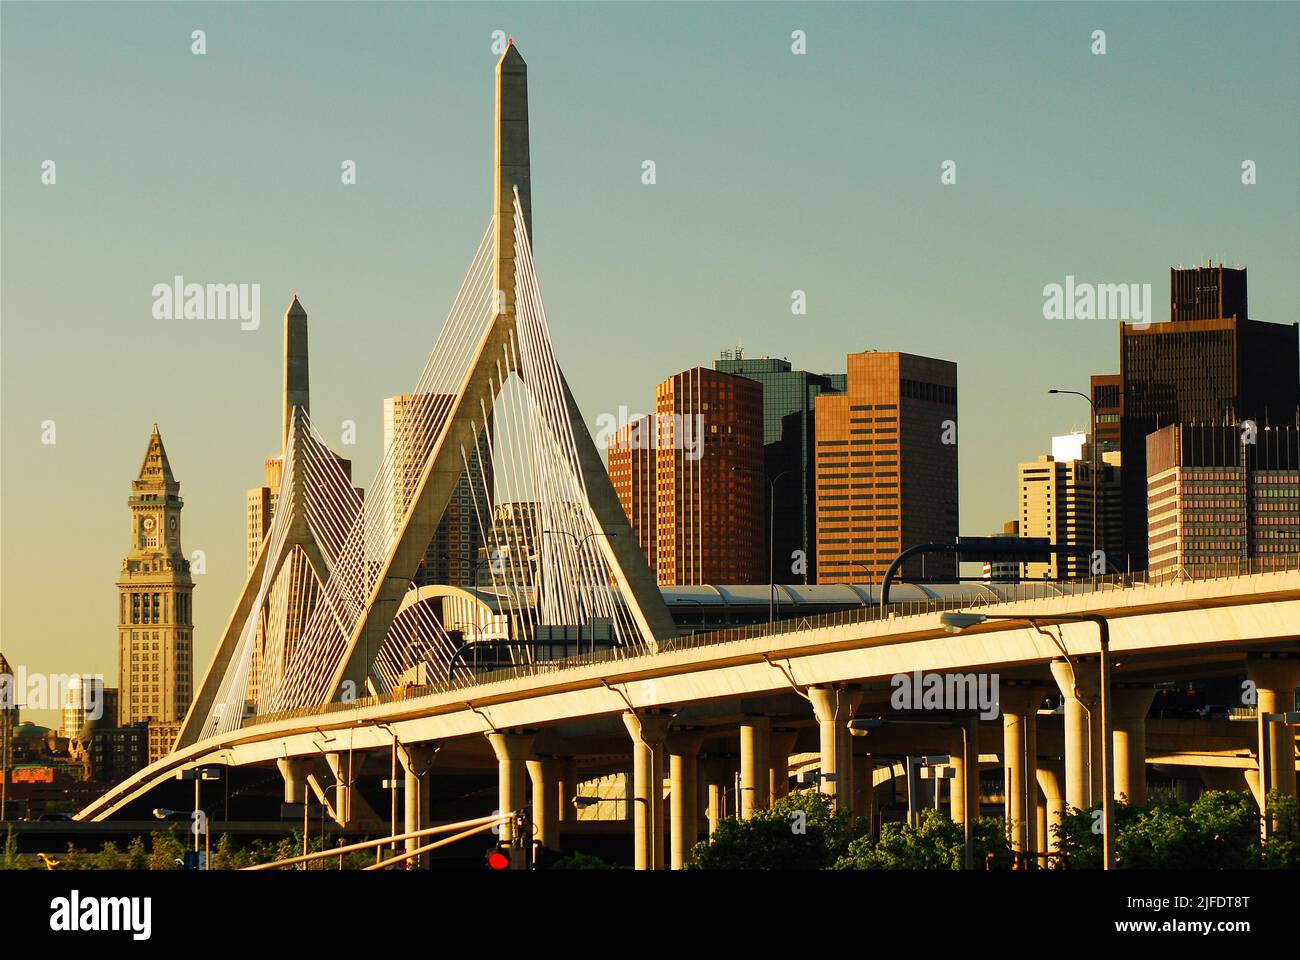 The Leonard P Zakim Bunker Hill Memorial Bridge is a cable stayed suspension bridge built in Boston, carrying i-93 and was part of the Big Dig project Stock Photo